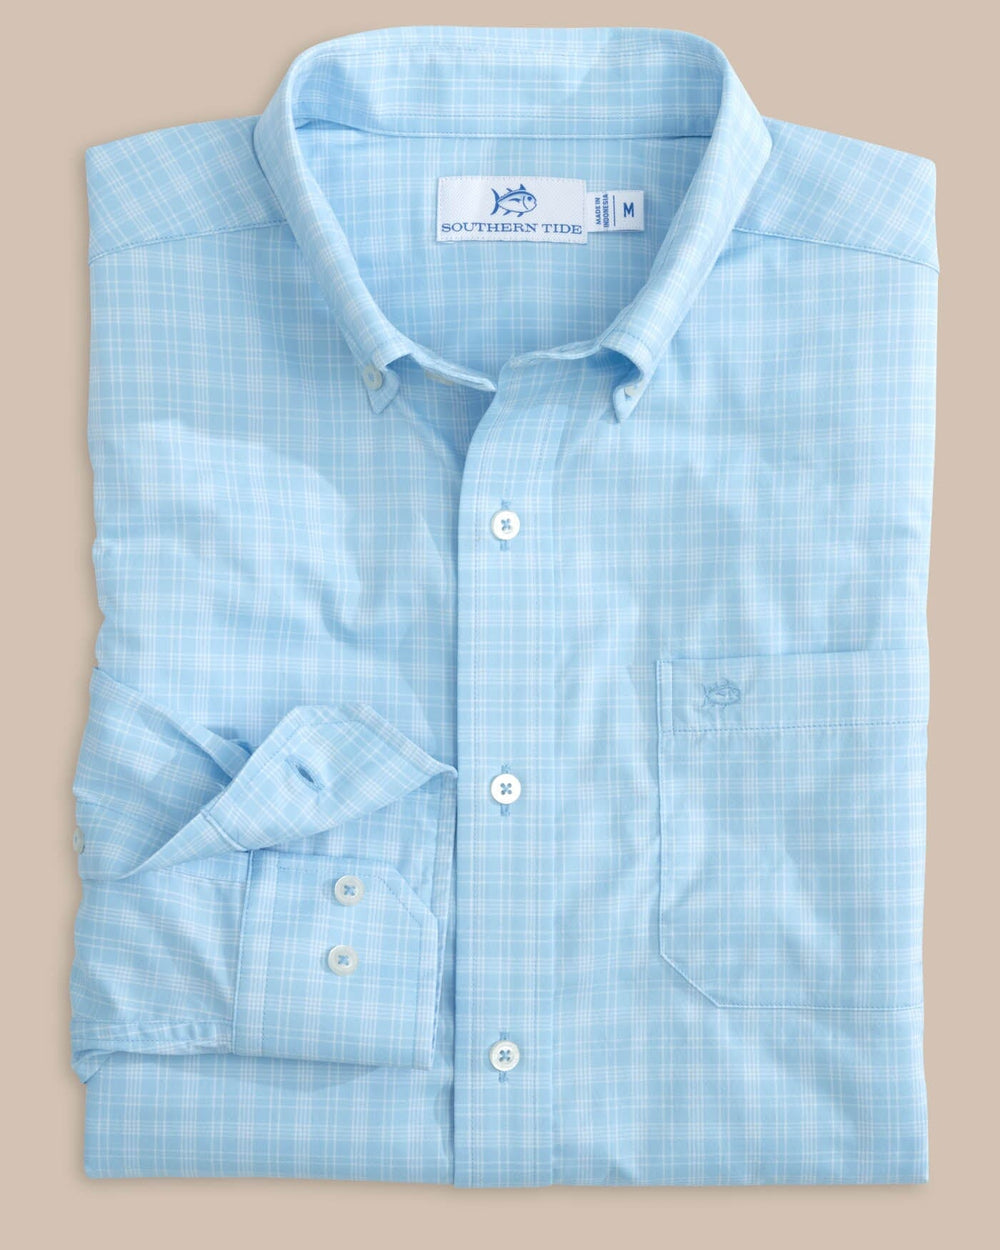 The front view of the Southern Tide brrr Intercoastal Pettigru Plaid Long Sleeve SportShirt by Southern Tide - Clearwater Blue